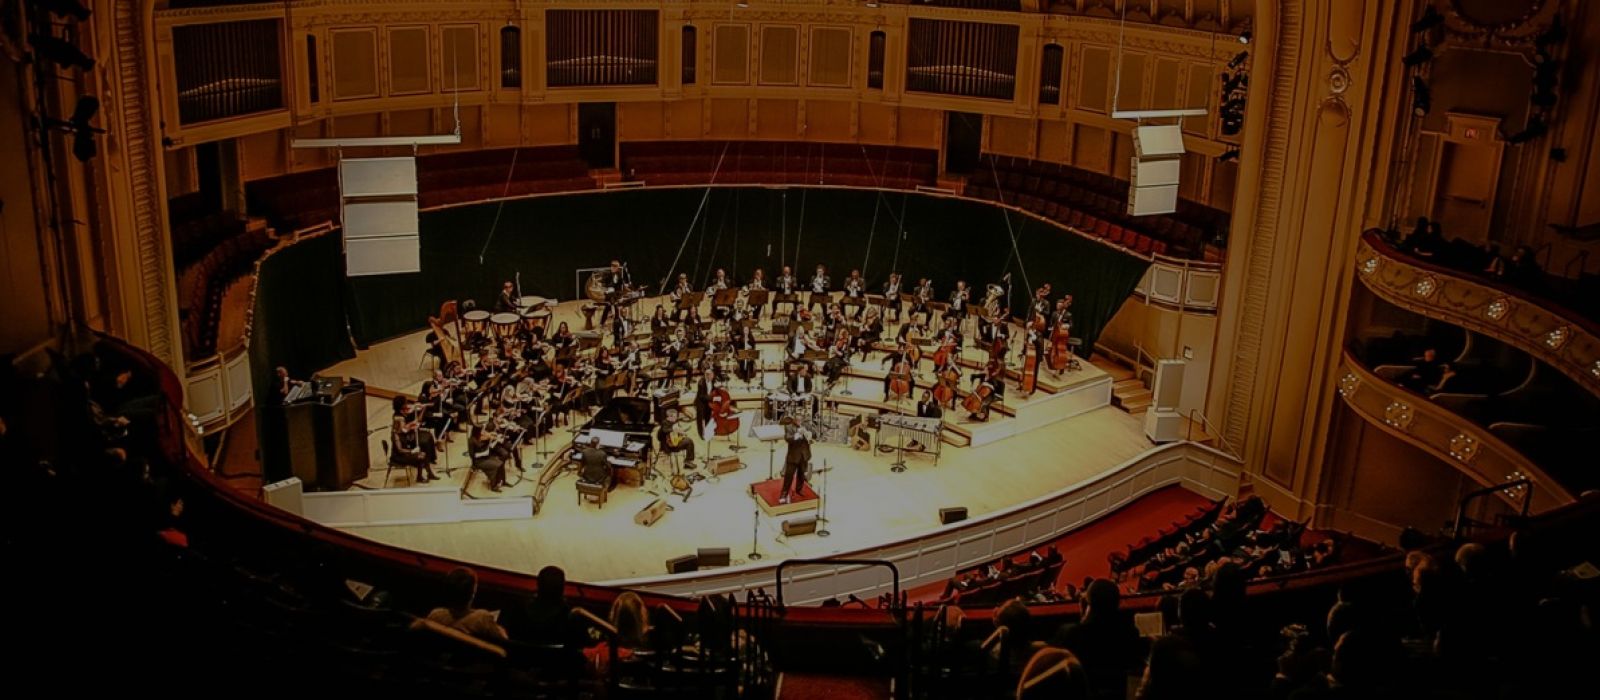 America's definitive 'third stream' orchestra combining jazz and classical music.